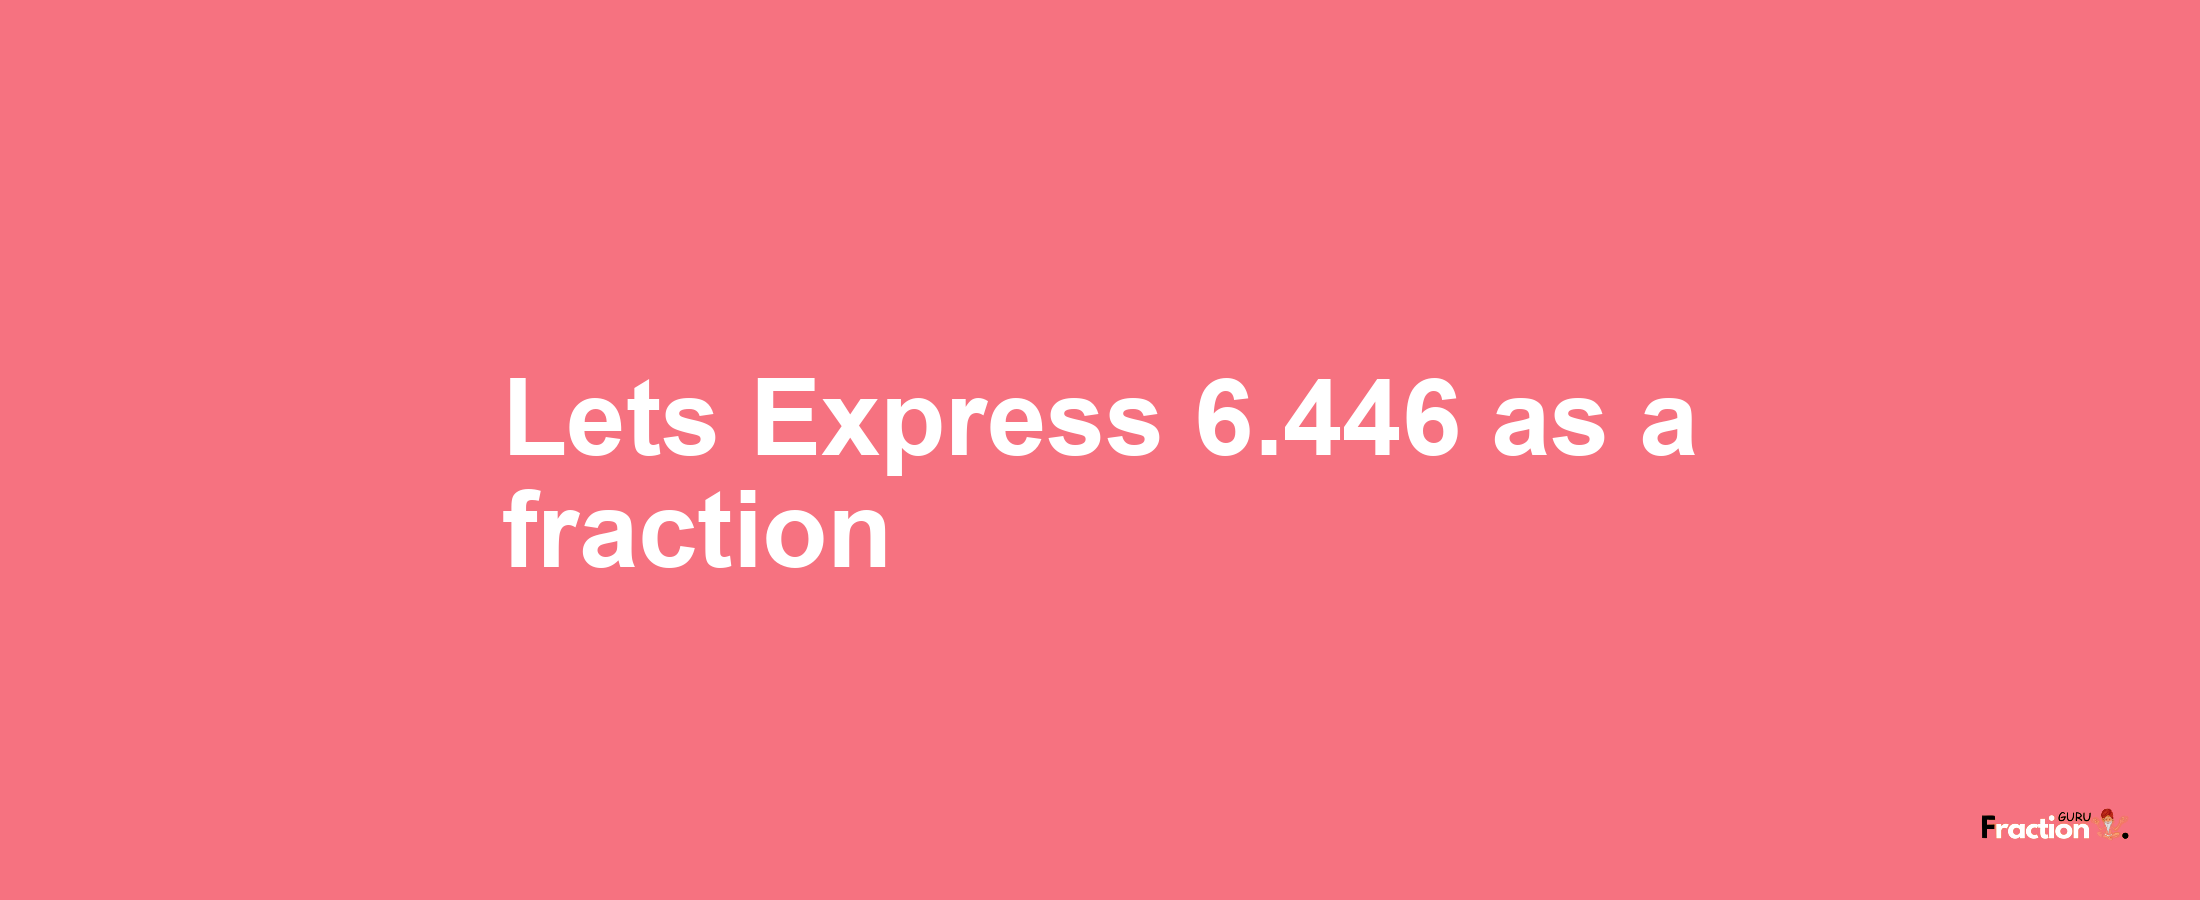 Lets Express 6.446 as afraction